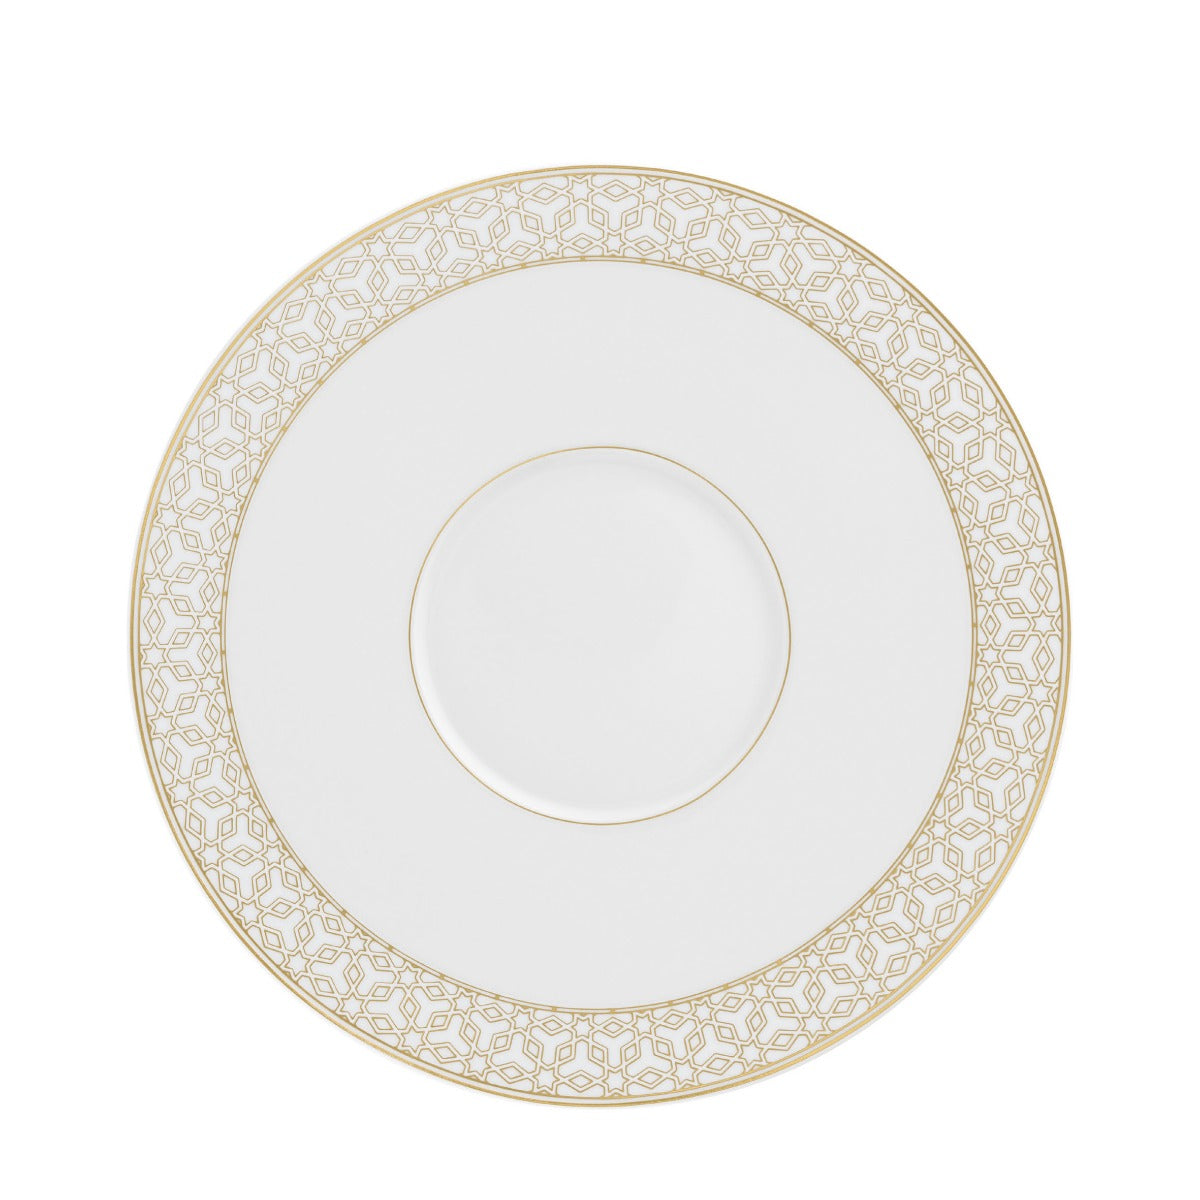 Large Gourmet Plate with Small Centre